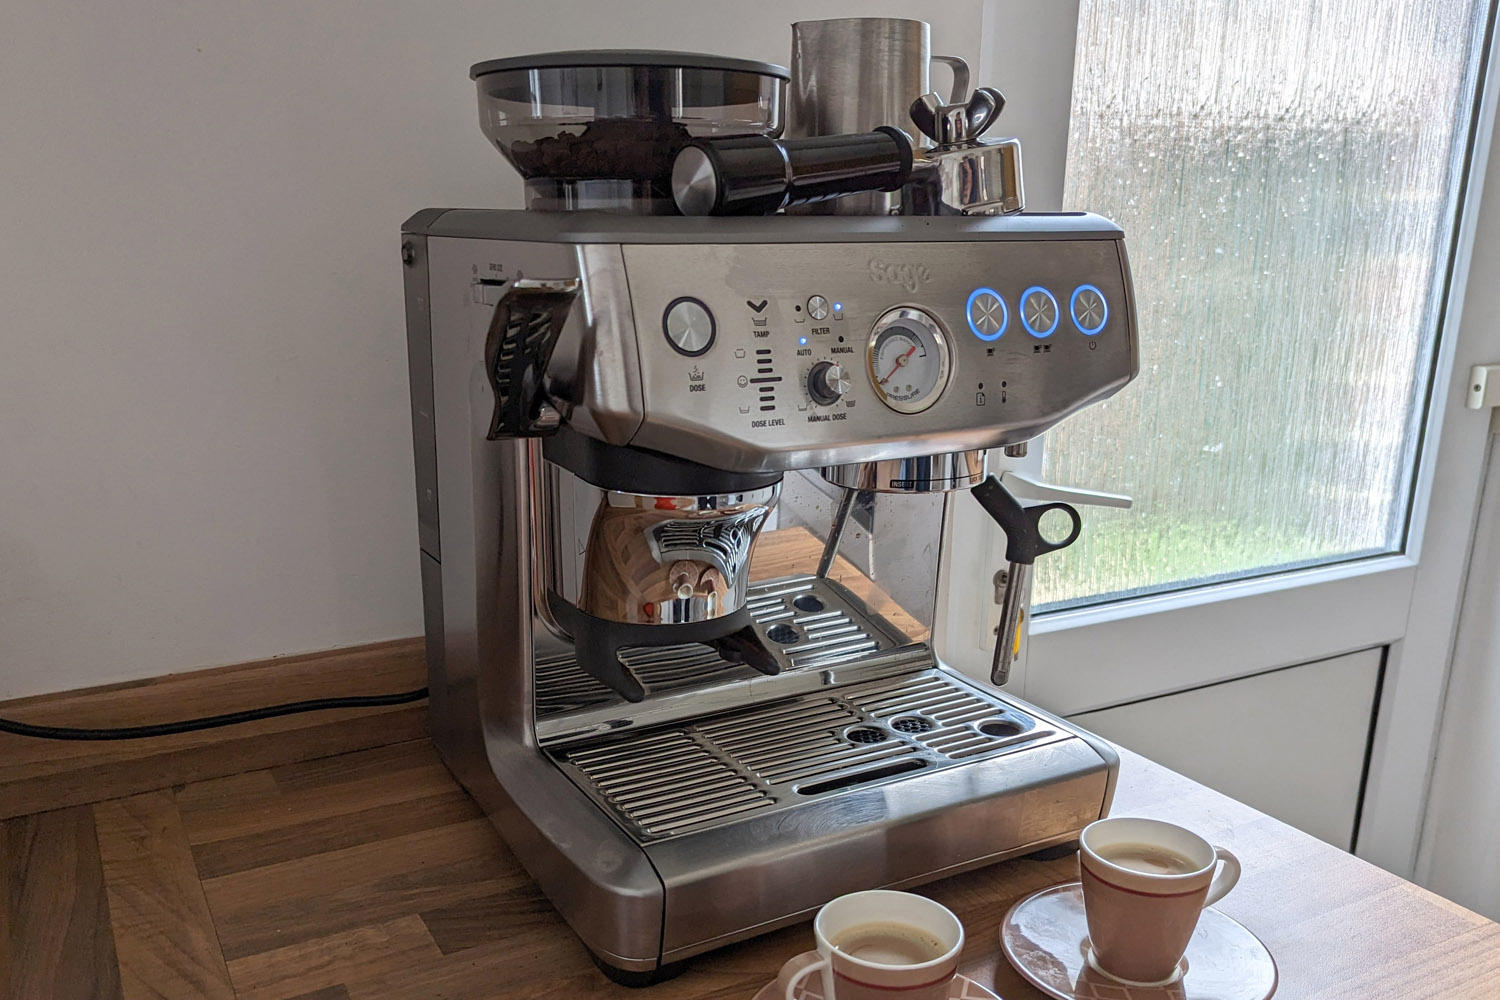 Breville Barista Express Impress Review: An Espresso Machine With Training  Wheels